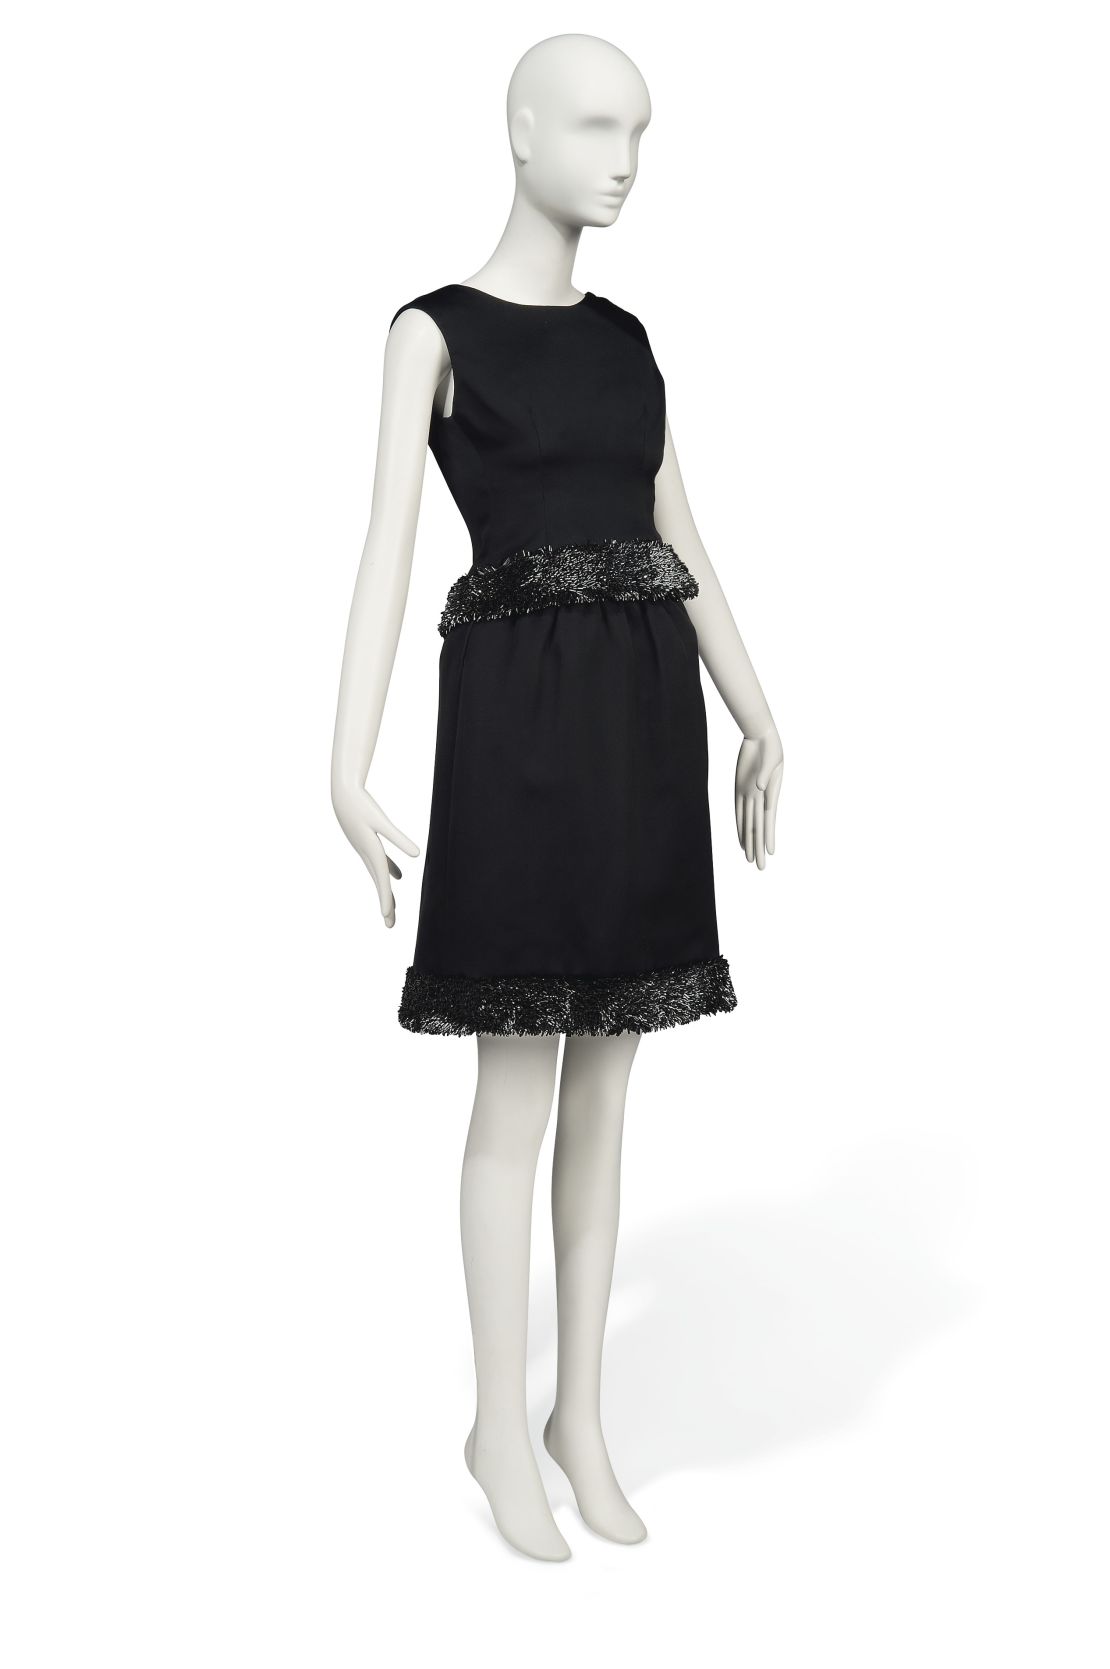 Lot 144: A Givenchy couture gown worn in "Charade" (1963)